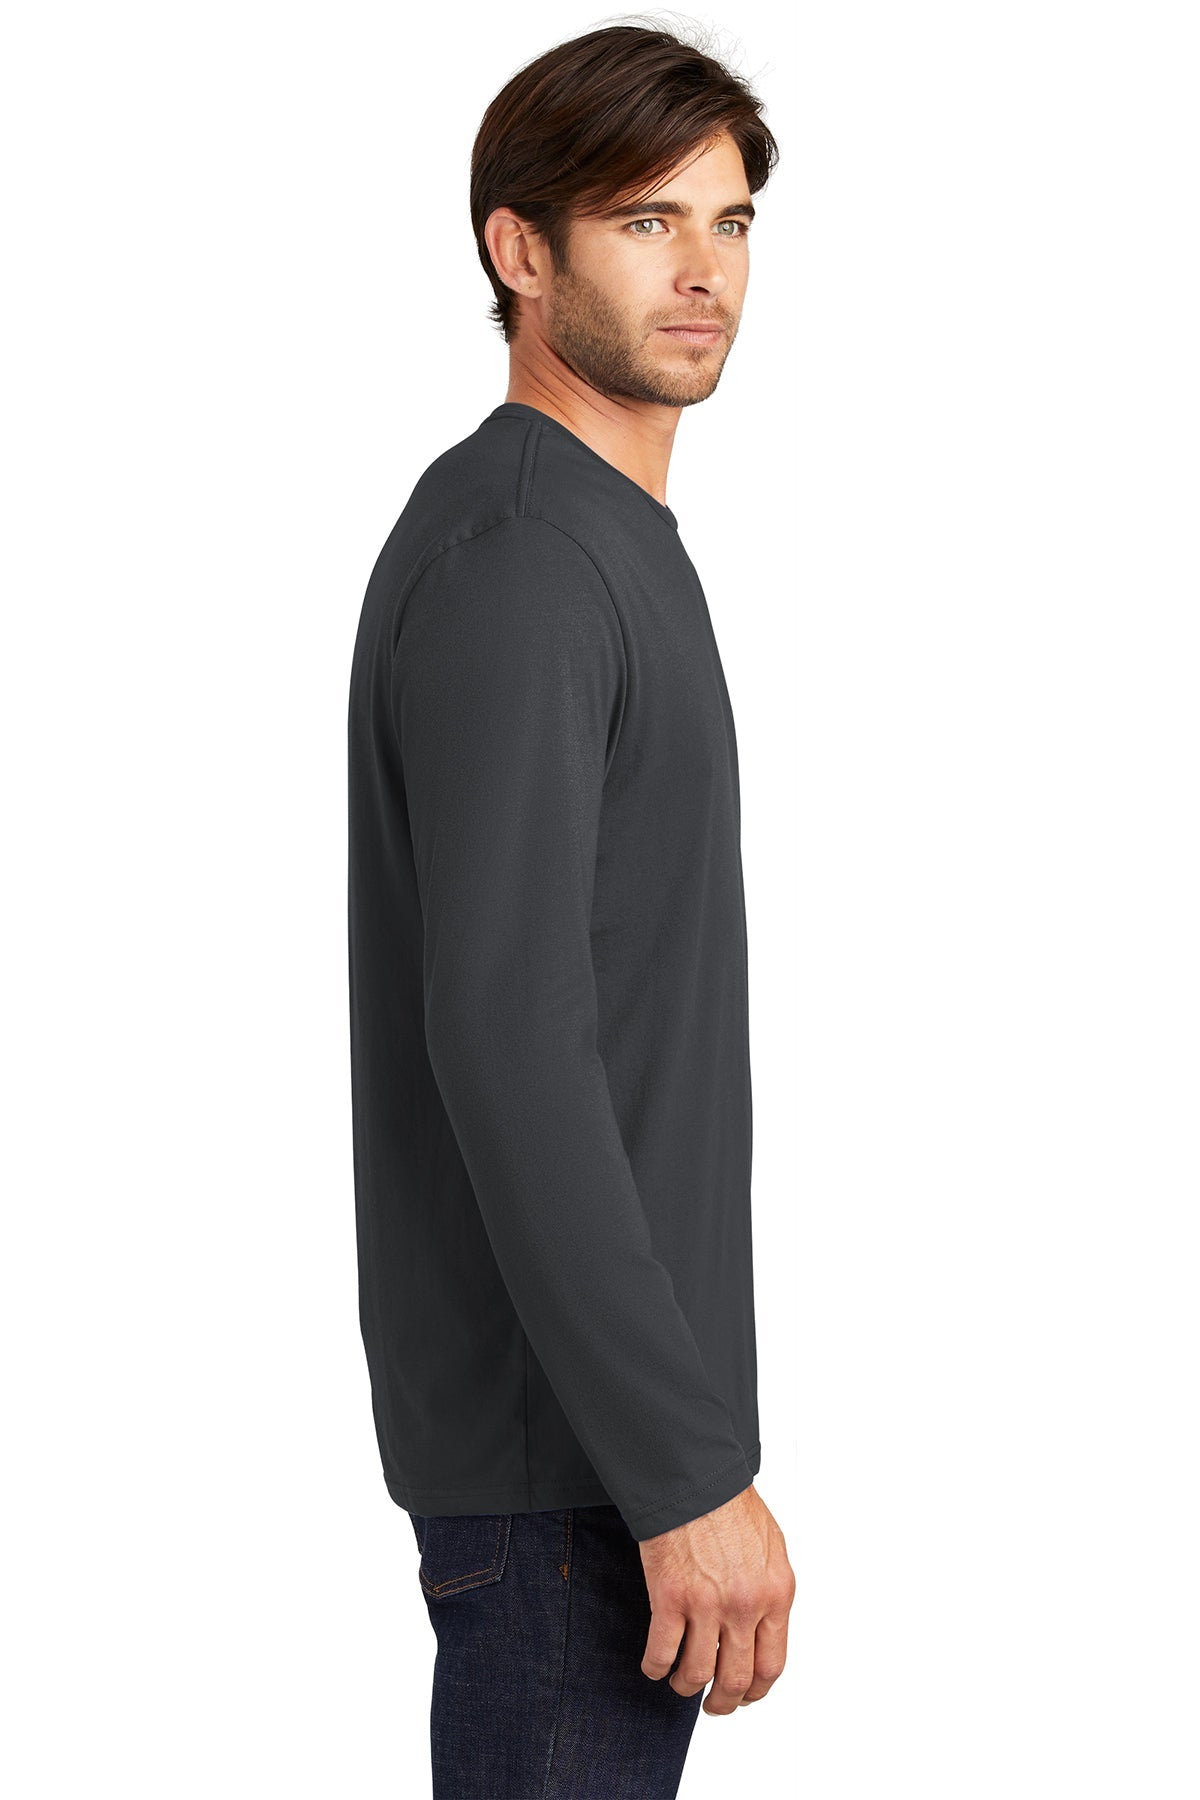 District Made Mens Perfect Weight Long Sleeve Tee